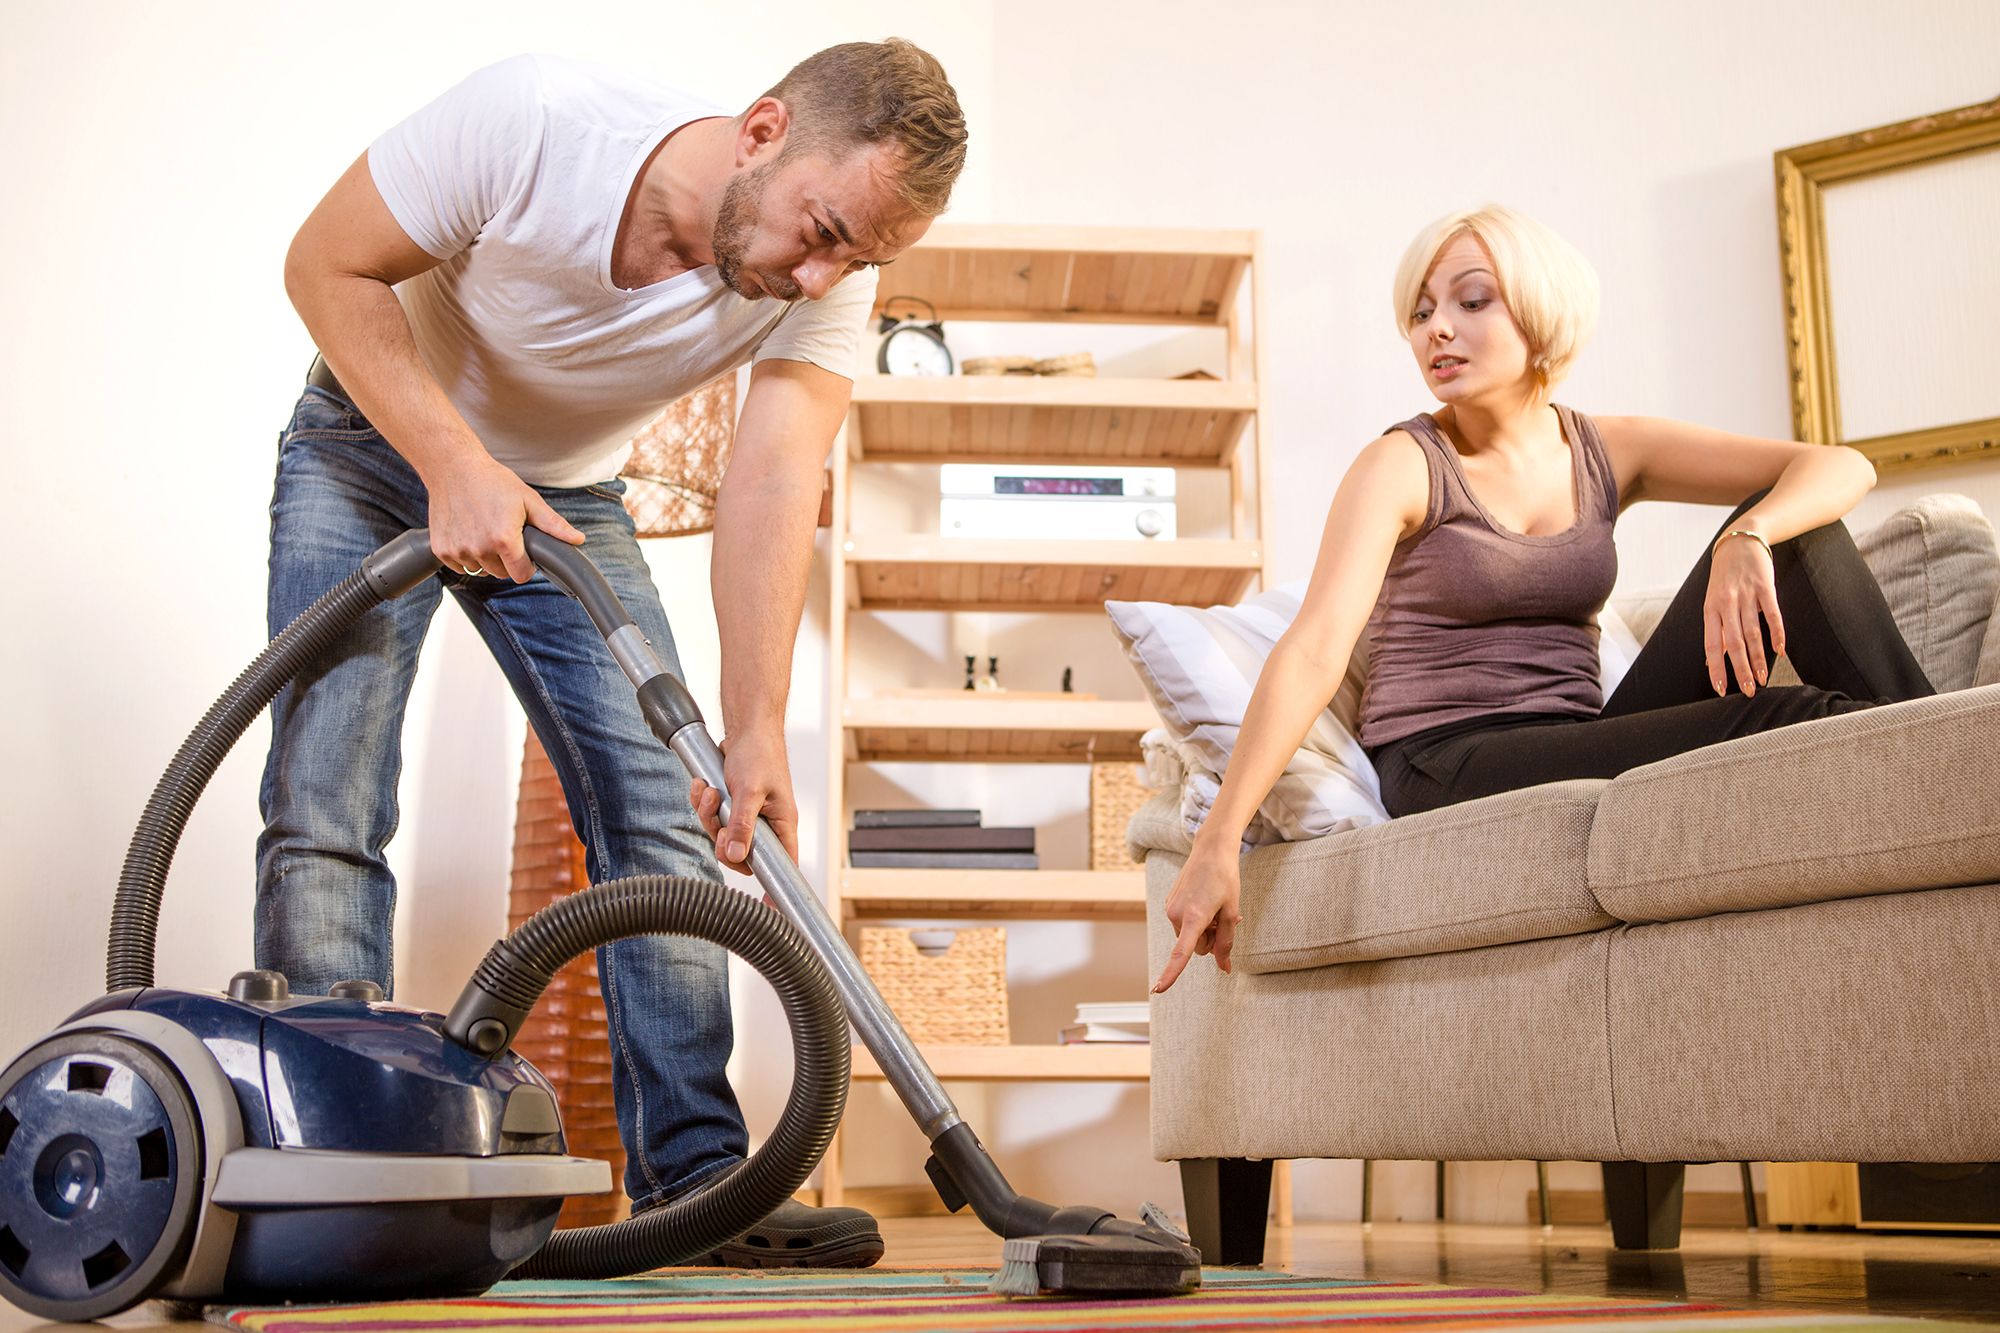 Woman Revealed How She Makes Her Husband Do More House Chores And The ... picture